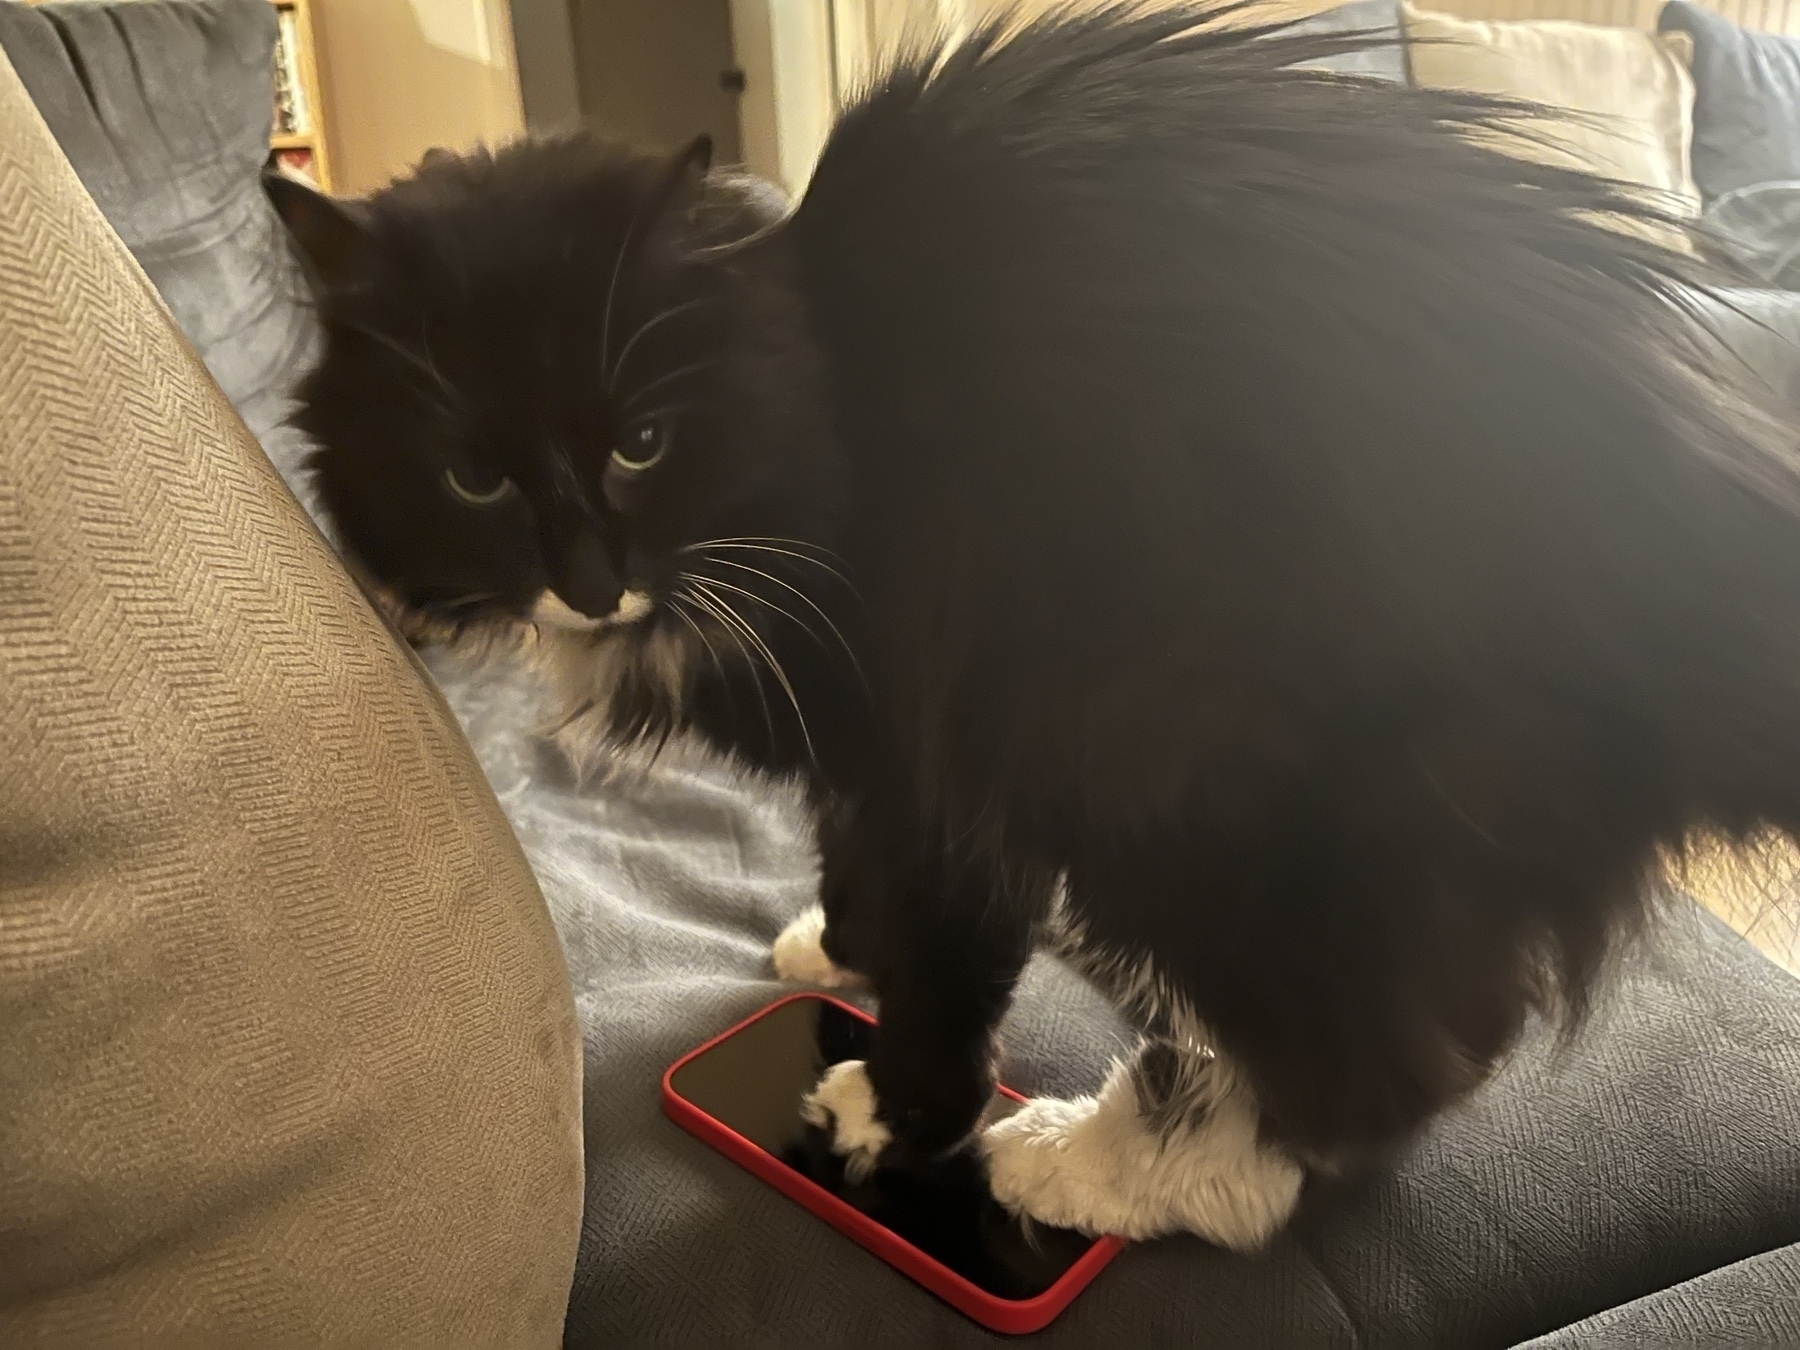 A black and white cat attempts to stand completely on top of an iPhone. The iPhone has a red case on so it as outlined in red. She is on a blue couch.